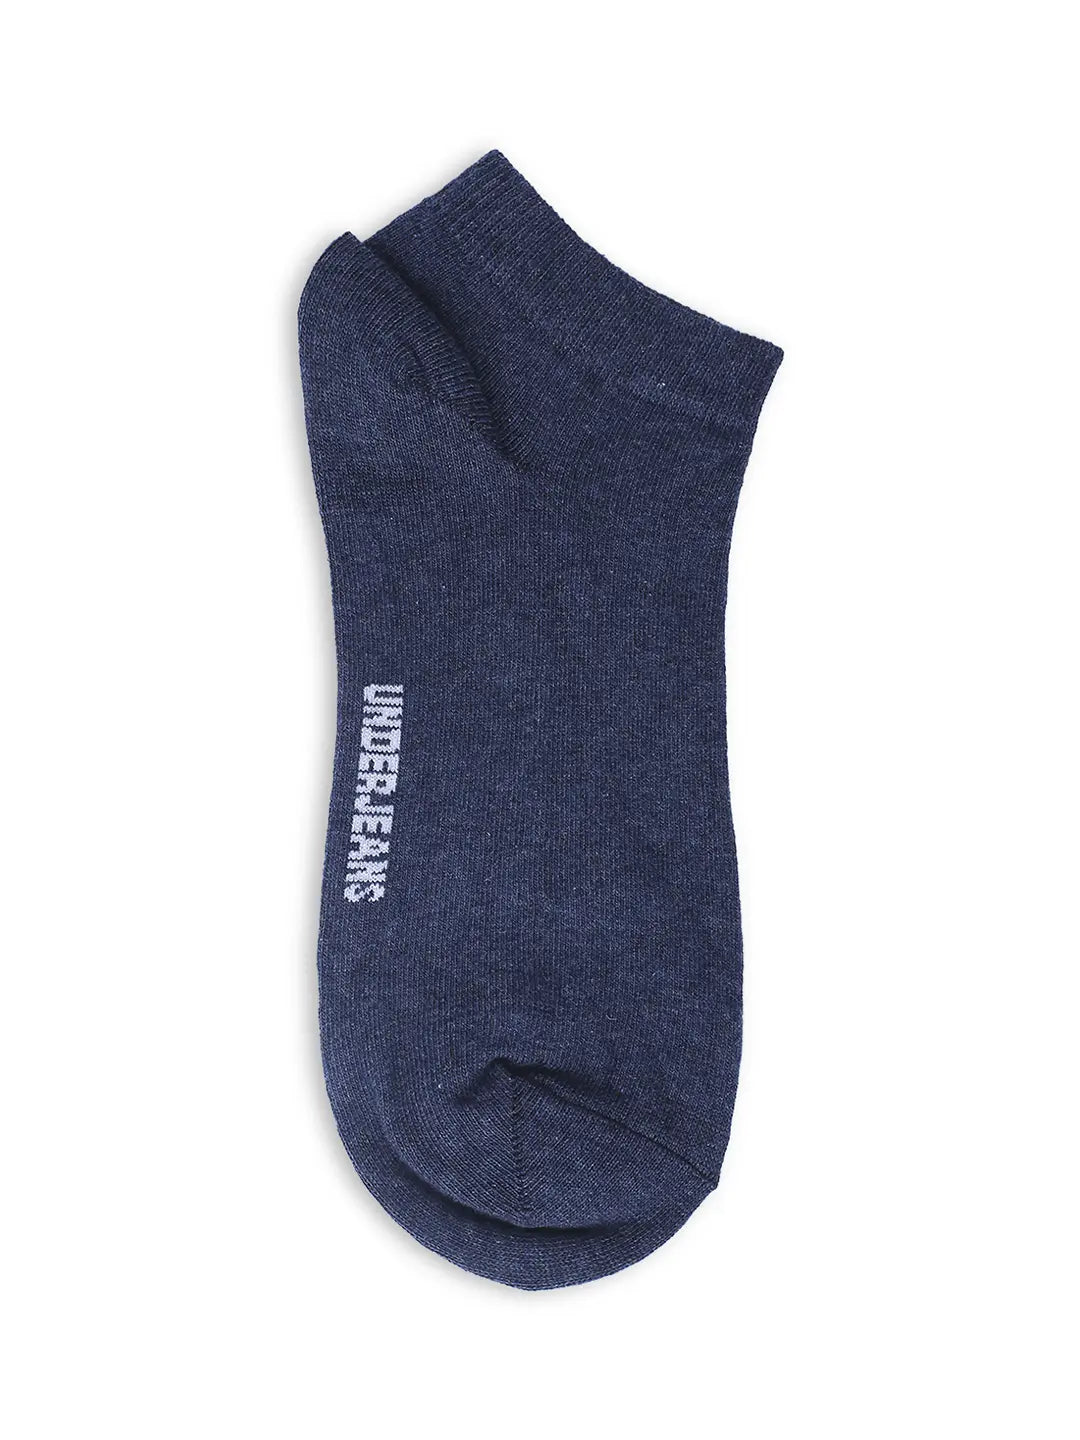 Right Angle Sneaker Socks with Tabs | Men's Ankle Socks | MUJI USA